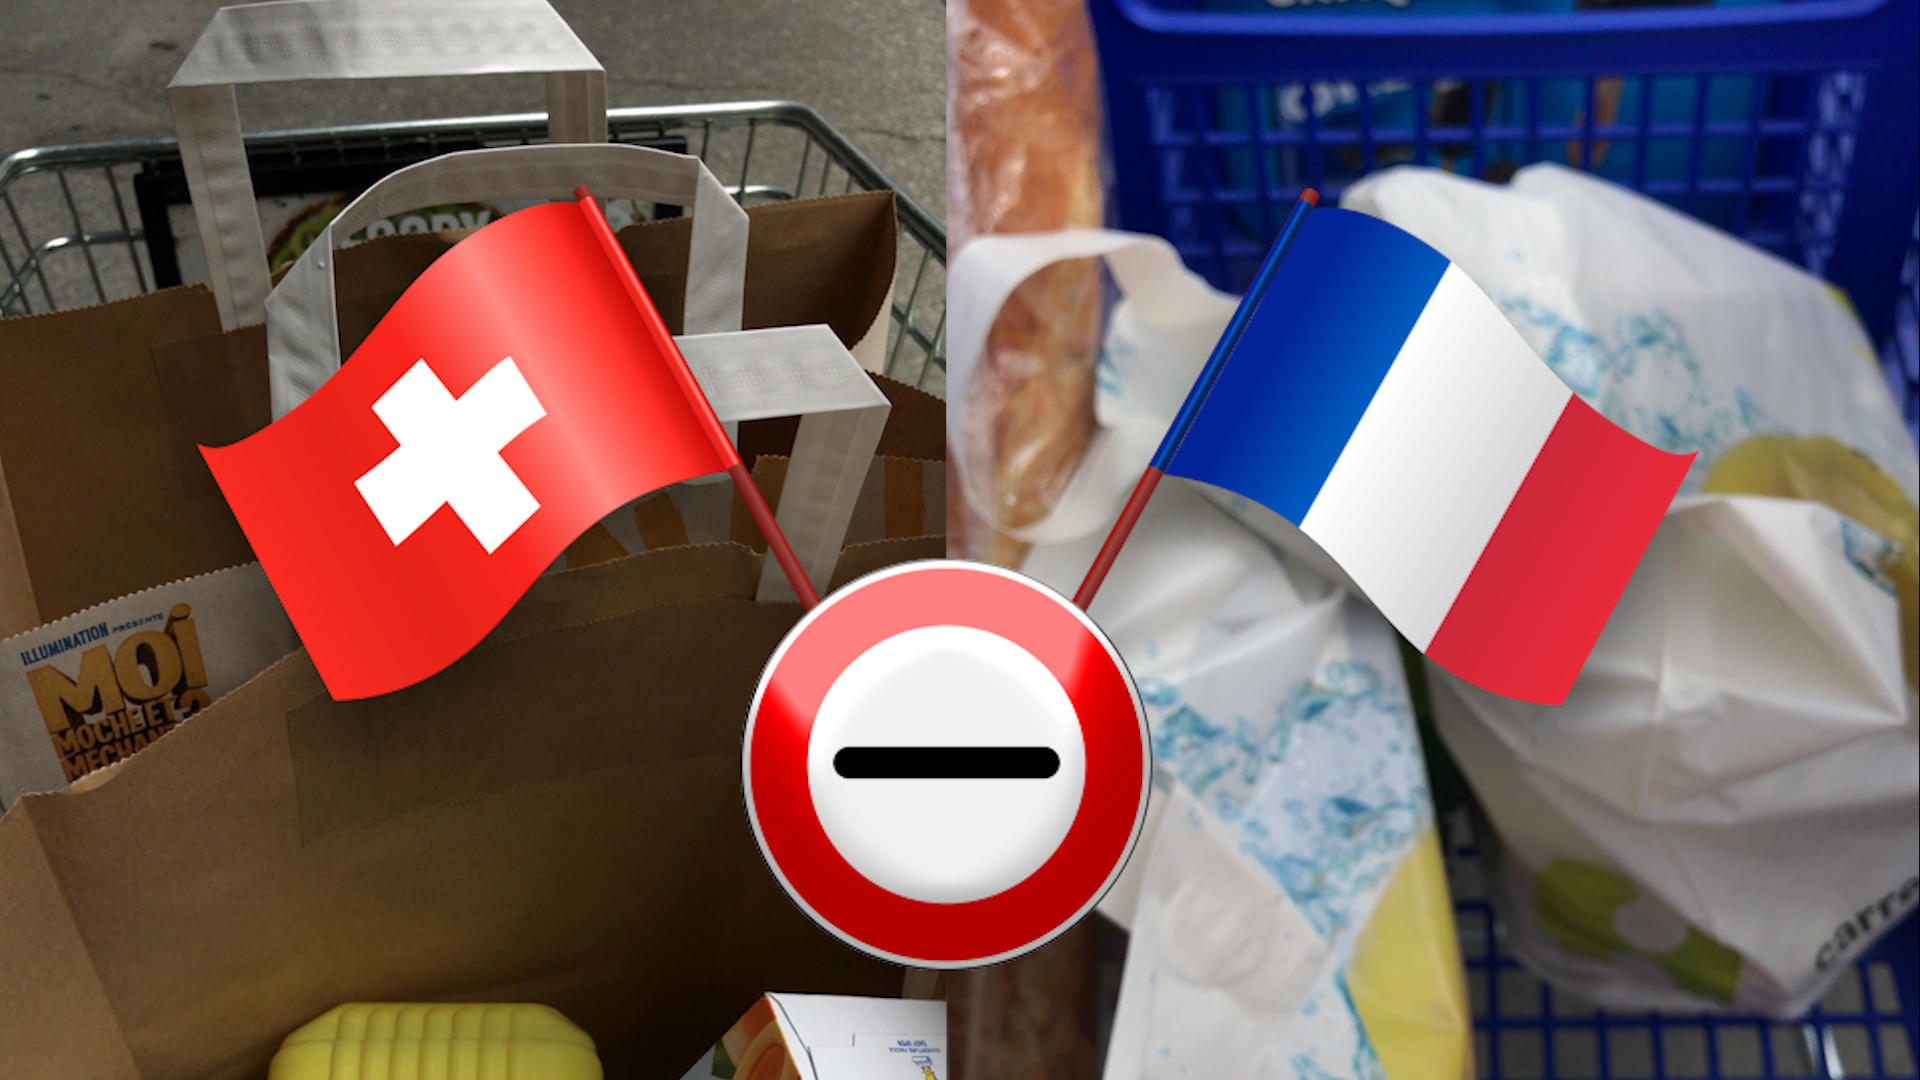 flag of Switzerland and France over an image of shopping cart from the two countries